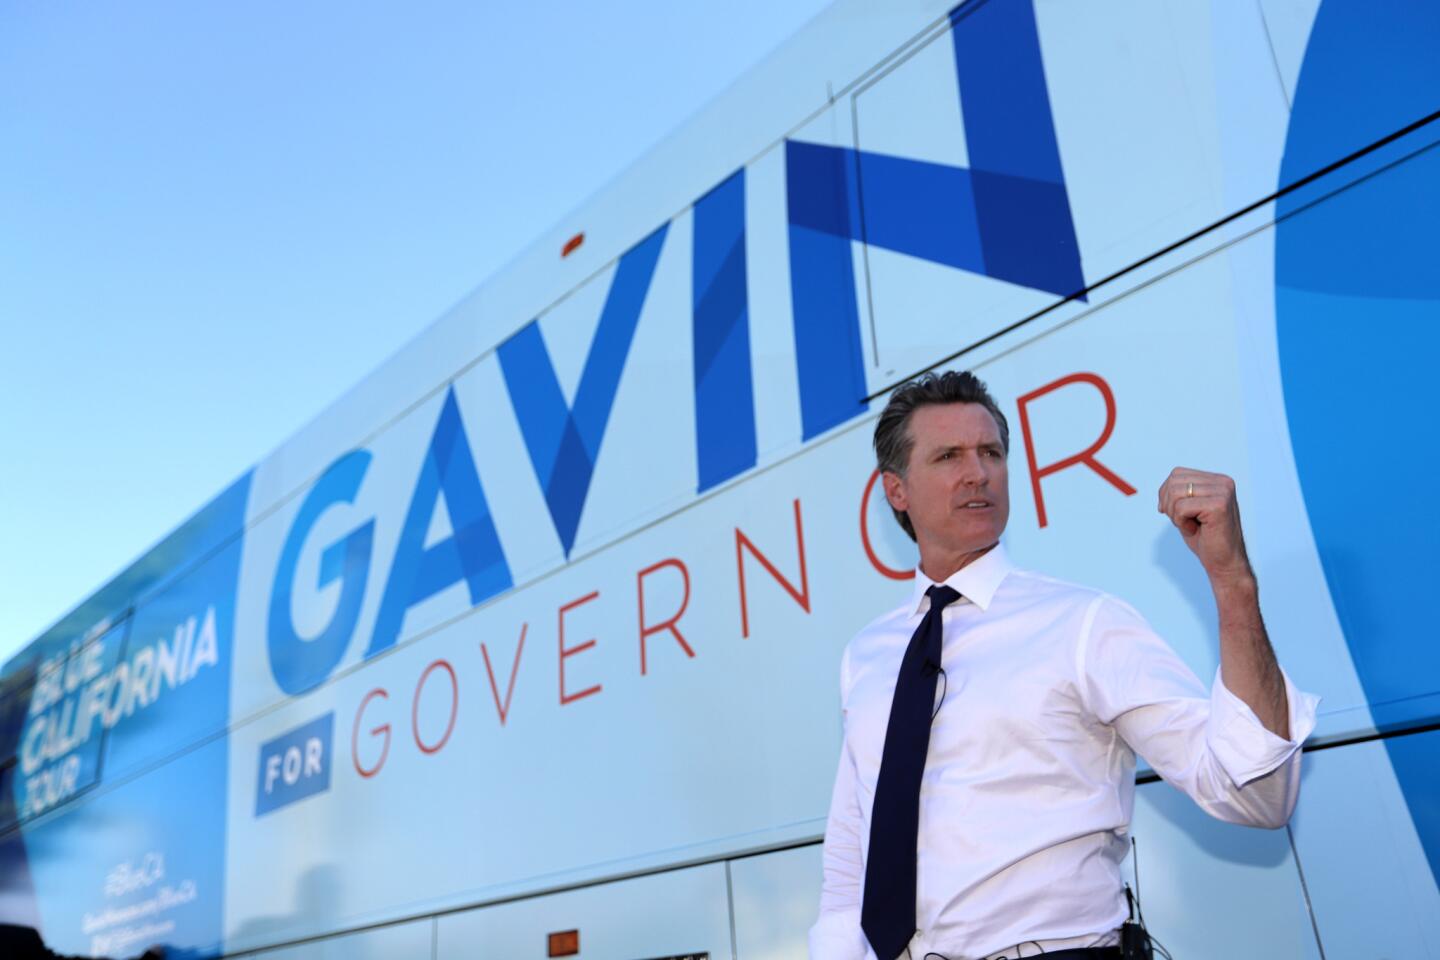 Lt. Gov. Gavin Newsom speaks to his staff as he boards his bus at a rally for congressional candidate Katie Hill and Assembly candidate Christy Smith.